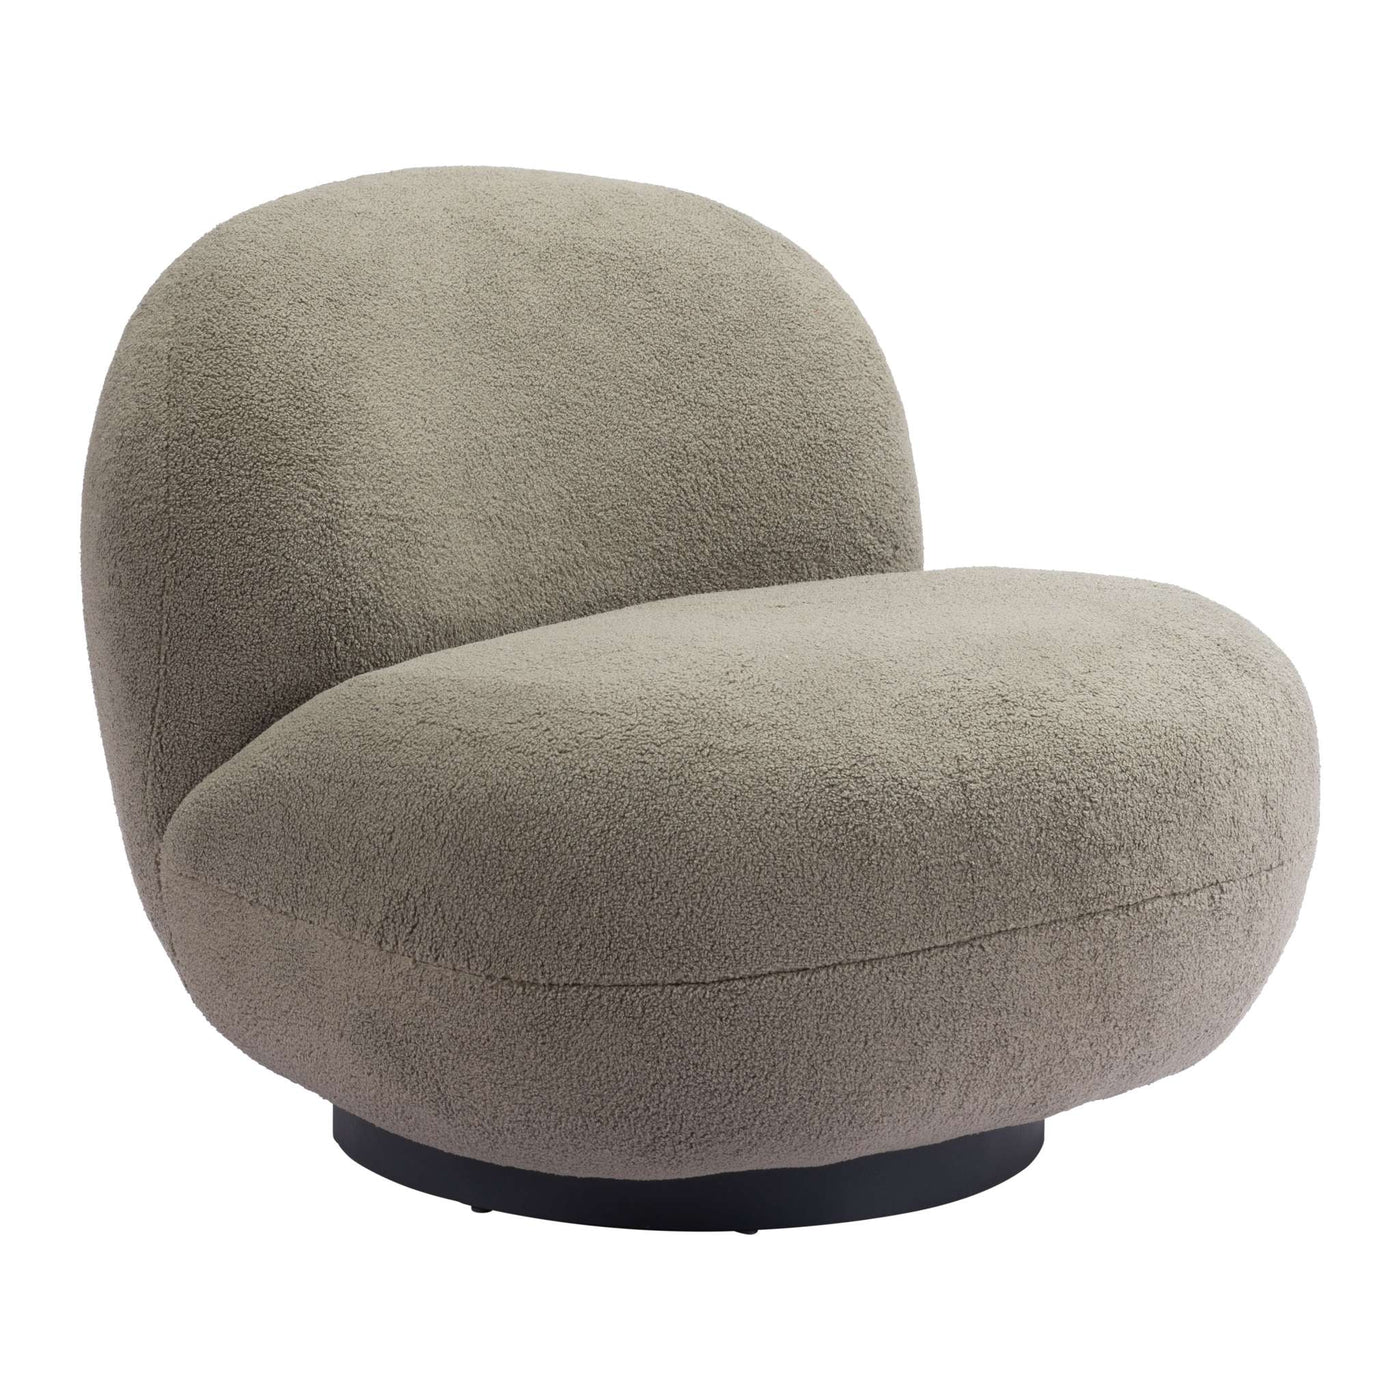 Zuo Mod Myanmar Accent Chair